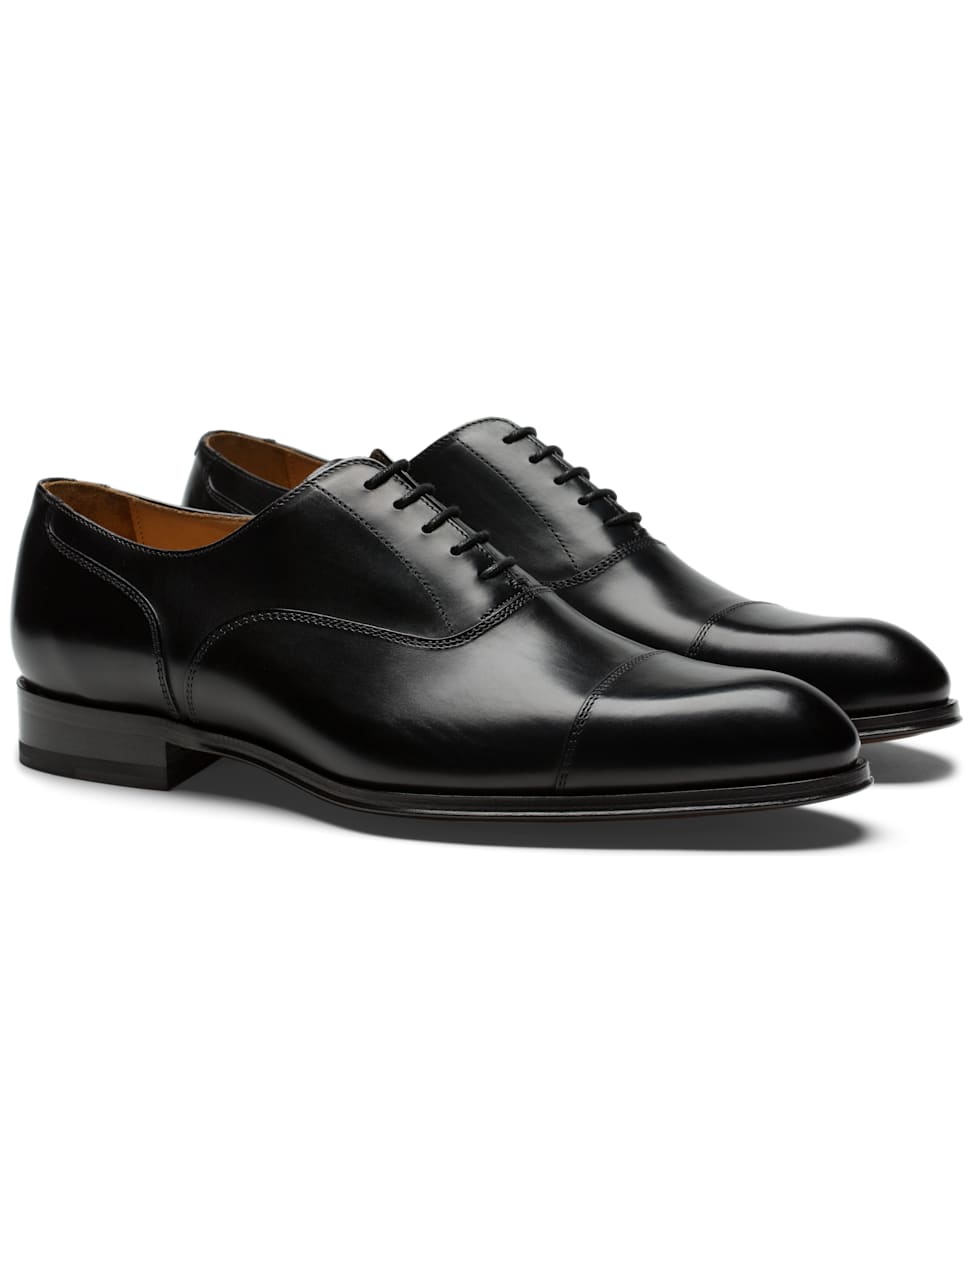 Black Oxford Fw1101 | Suitsupply Online Store